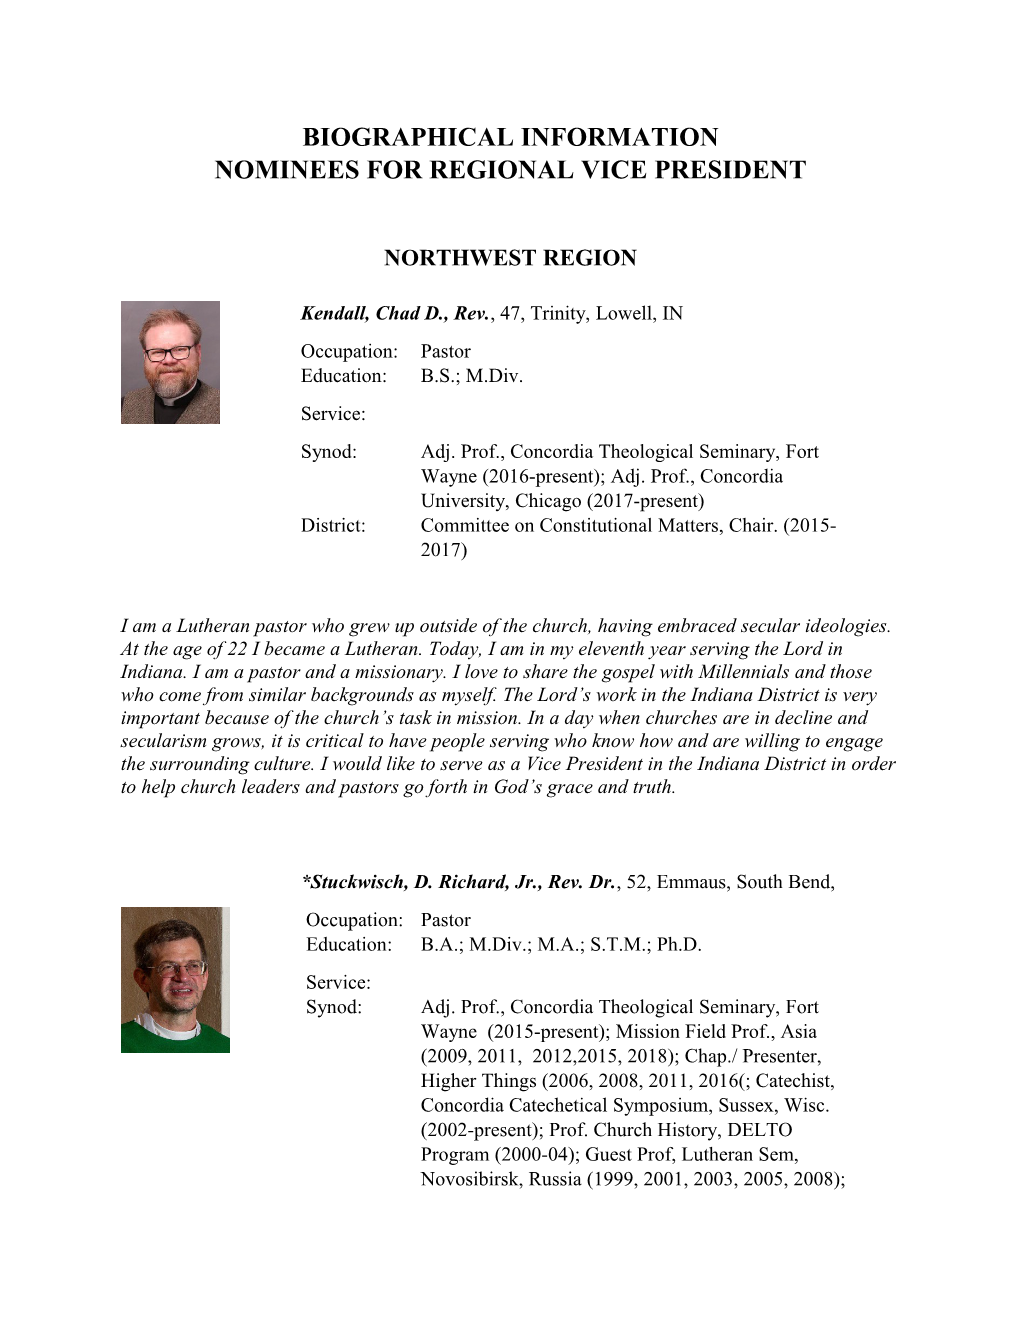 Nominees for Regional Vice President